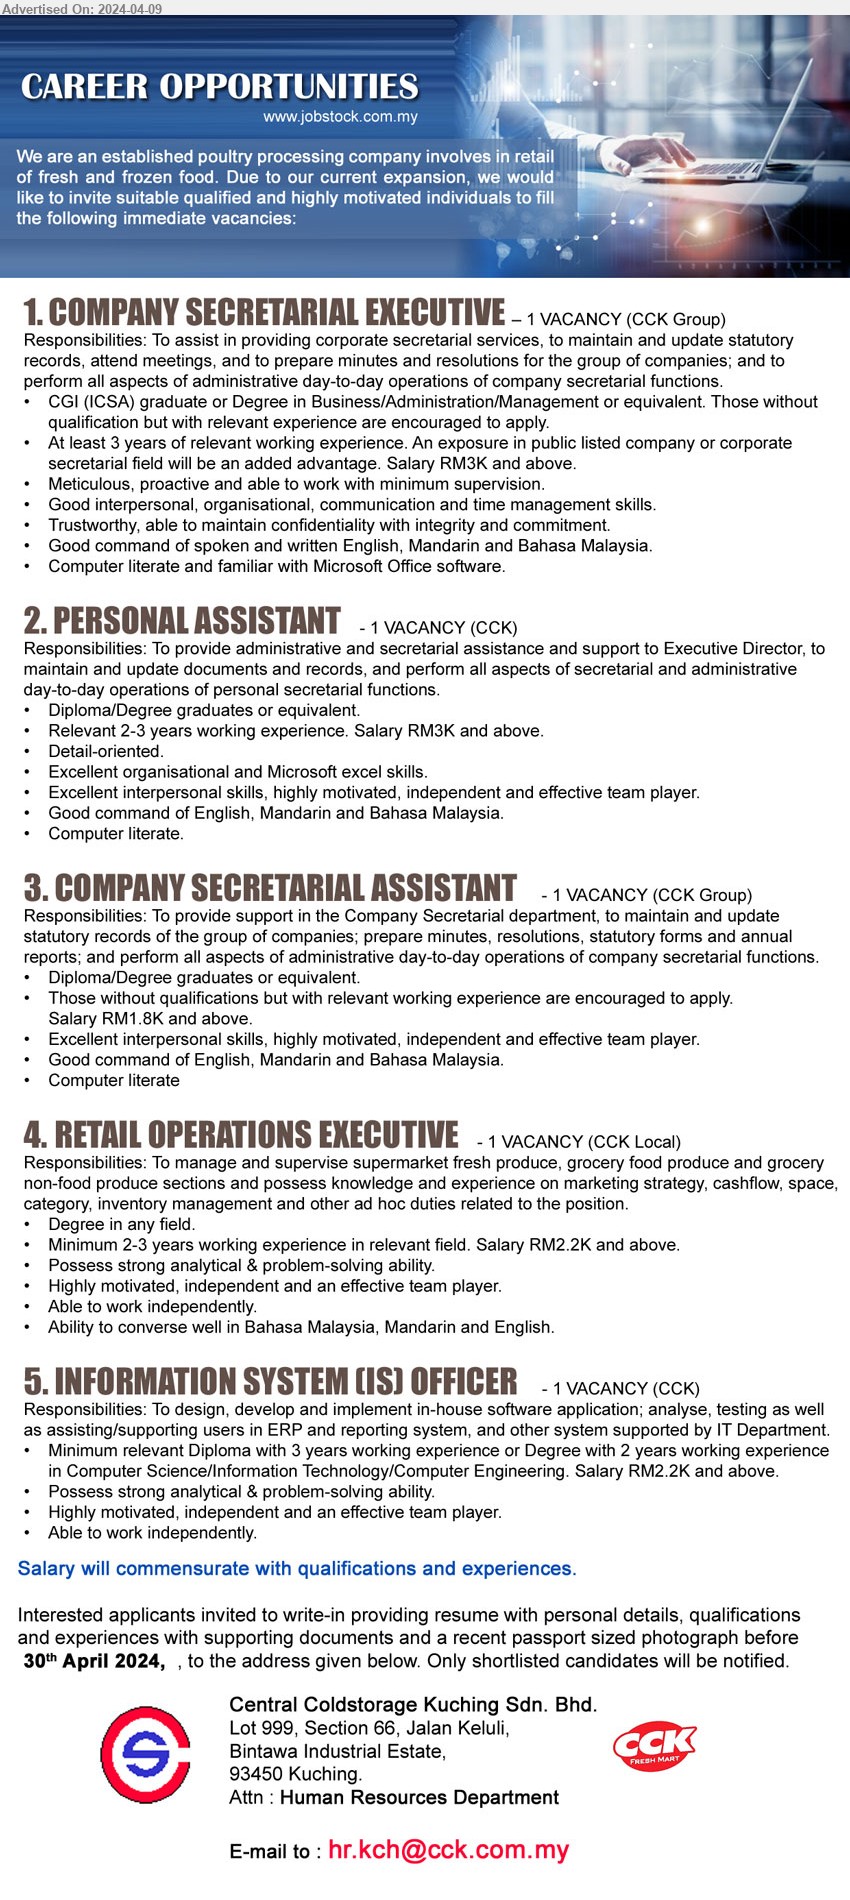 CENTRAL COLDSTORAGE KUCHING SDN BHD - 1. COMPANY SECRETARIAL EXECUTIVE  (Kuching), CGI (ICSA) graduate or Degree in Business/Administration/Management, Salary RM3K and above...
2. PERSONAL ASSISTANT  (Kuching), Diploma/Degree graduates or equivalent, Relevant 2-3 years working experience. Salary RM3K and above ,...
3. COMPANY SECRETARIAL ASSISTANT  (Kuching), Diploma/Degree graduates, RM1.8K and above,...
4. RETAIL OPERATIONS EXECUTIVE  (Kuching), Degree, 2-3 years working experience in relevant field. Salary RM2.2K and above,...
5. INFORMATION SYSTEM (IS) OFFICER  (Kuching), Diploma with 3 yrs. exp., Degree with 2 yrs. exp. in Computer Science/Information Technology/Computer Engineering, Salary RM2.2K,...
Email resume to ...
